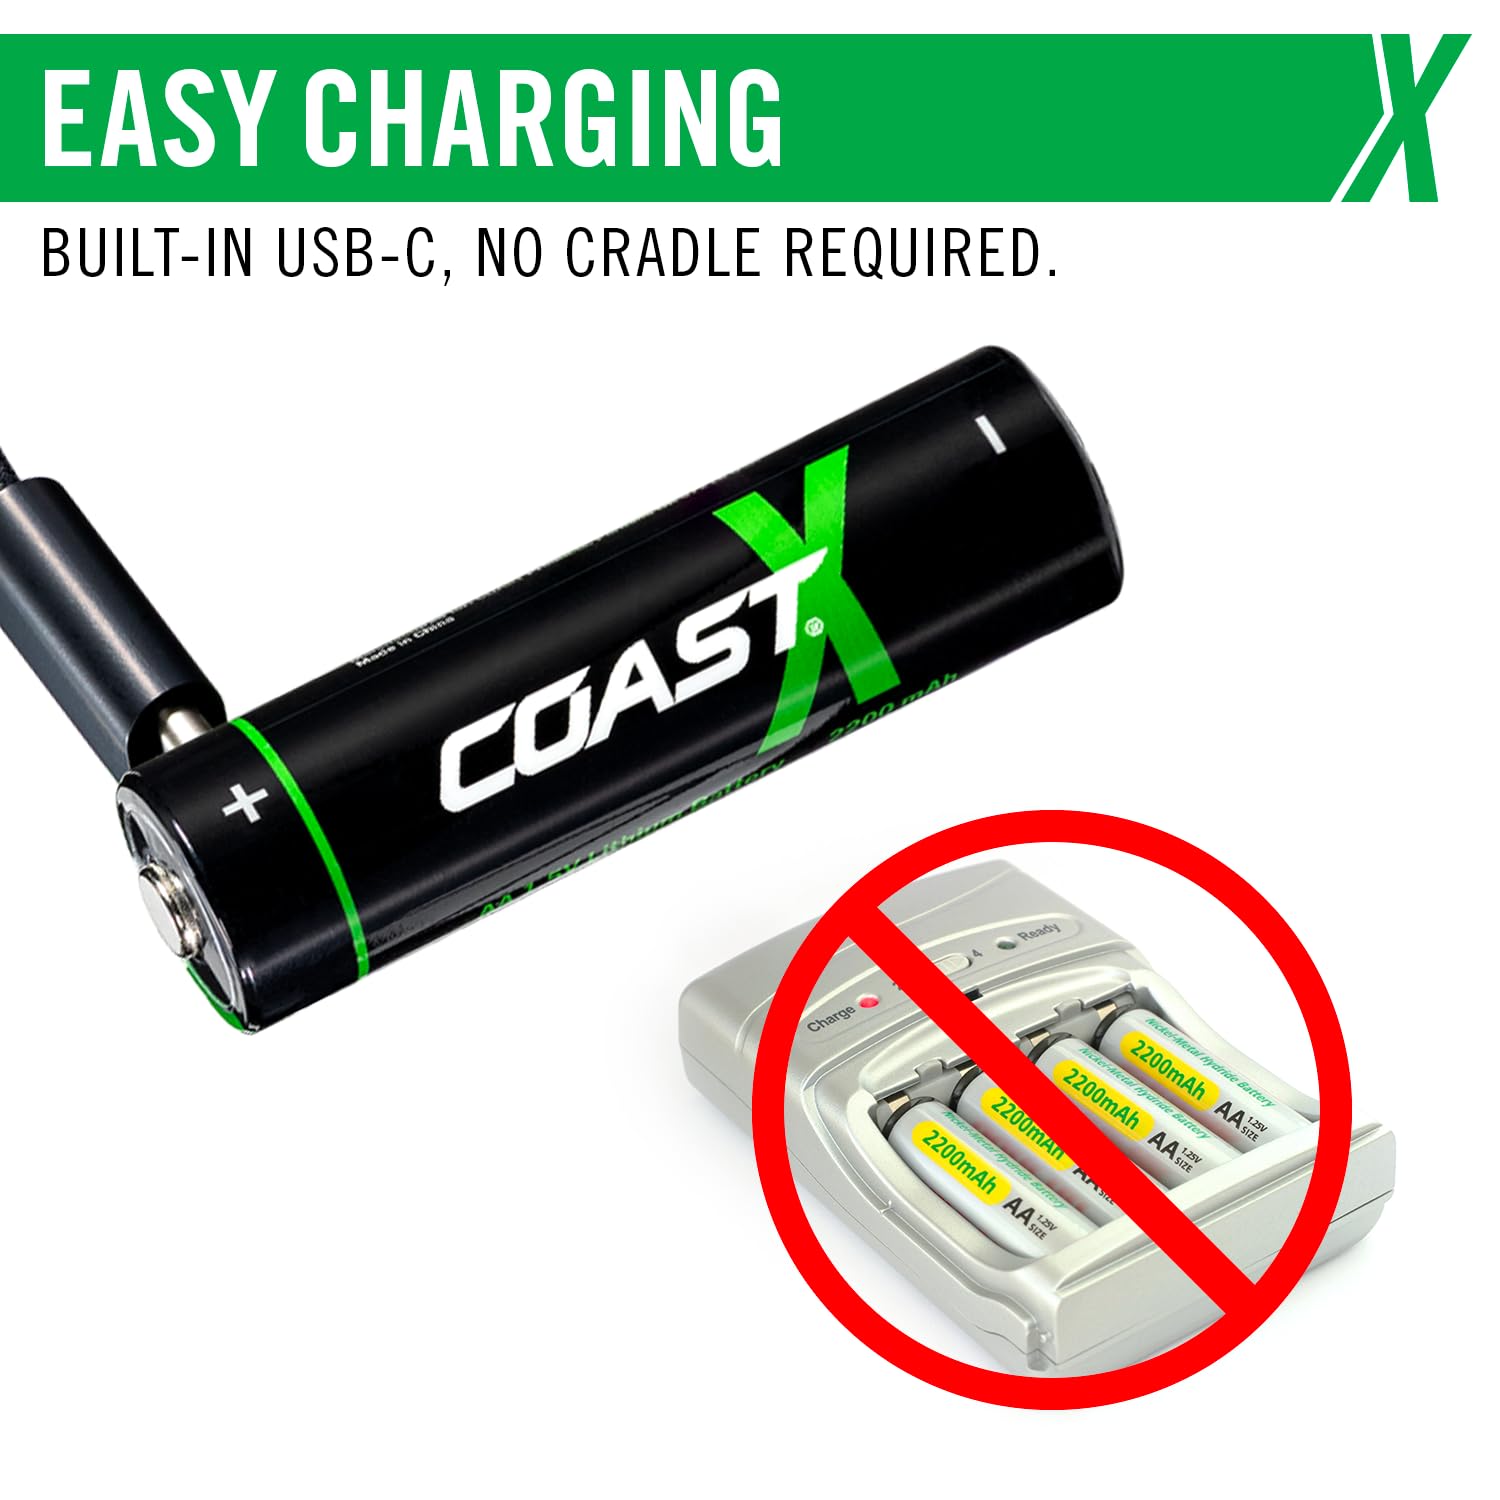 Coast AAA USB-C Rechargeable Batteries, ZITHION-X, Lithium Ion 1.5v 750 mAh, Long Lasting, Charges Under 1 Hour, Over 1000 Charges, Charging Cable Included, 4-Battery Pack